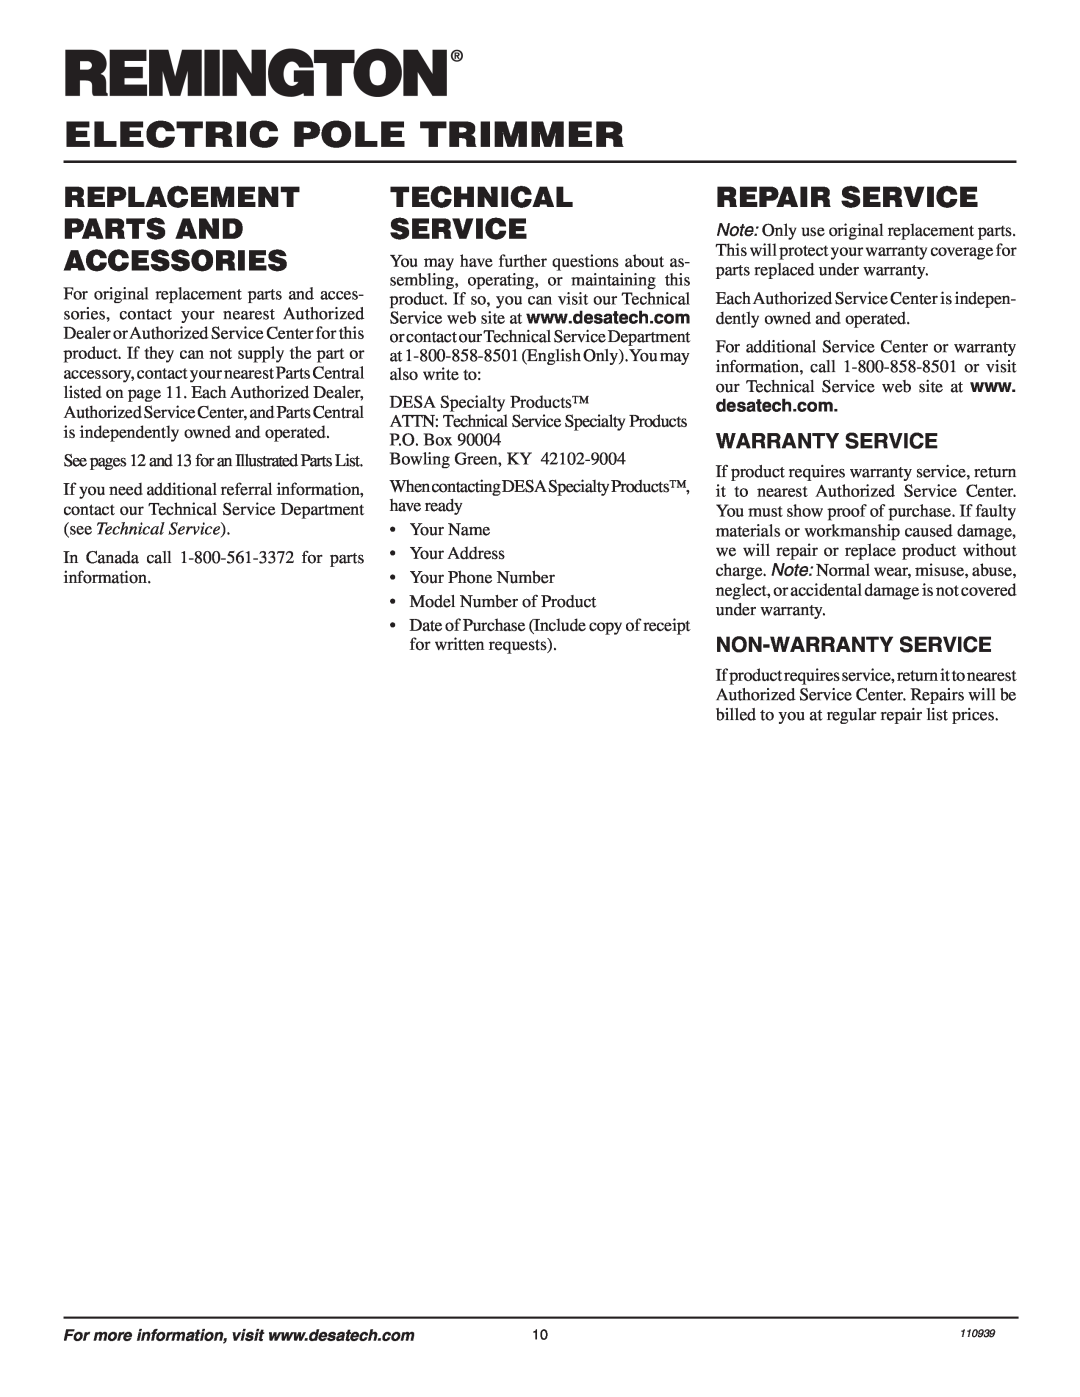 Desa 110946-01A owner manual Replacement Parts And Accessories, Technical Service, Repair Service, Warranty Service 